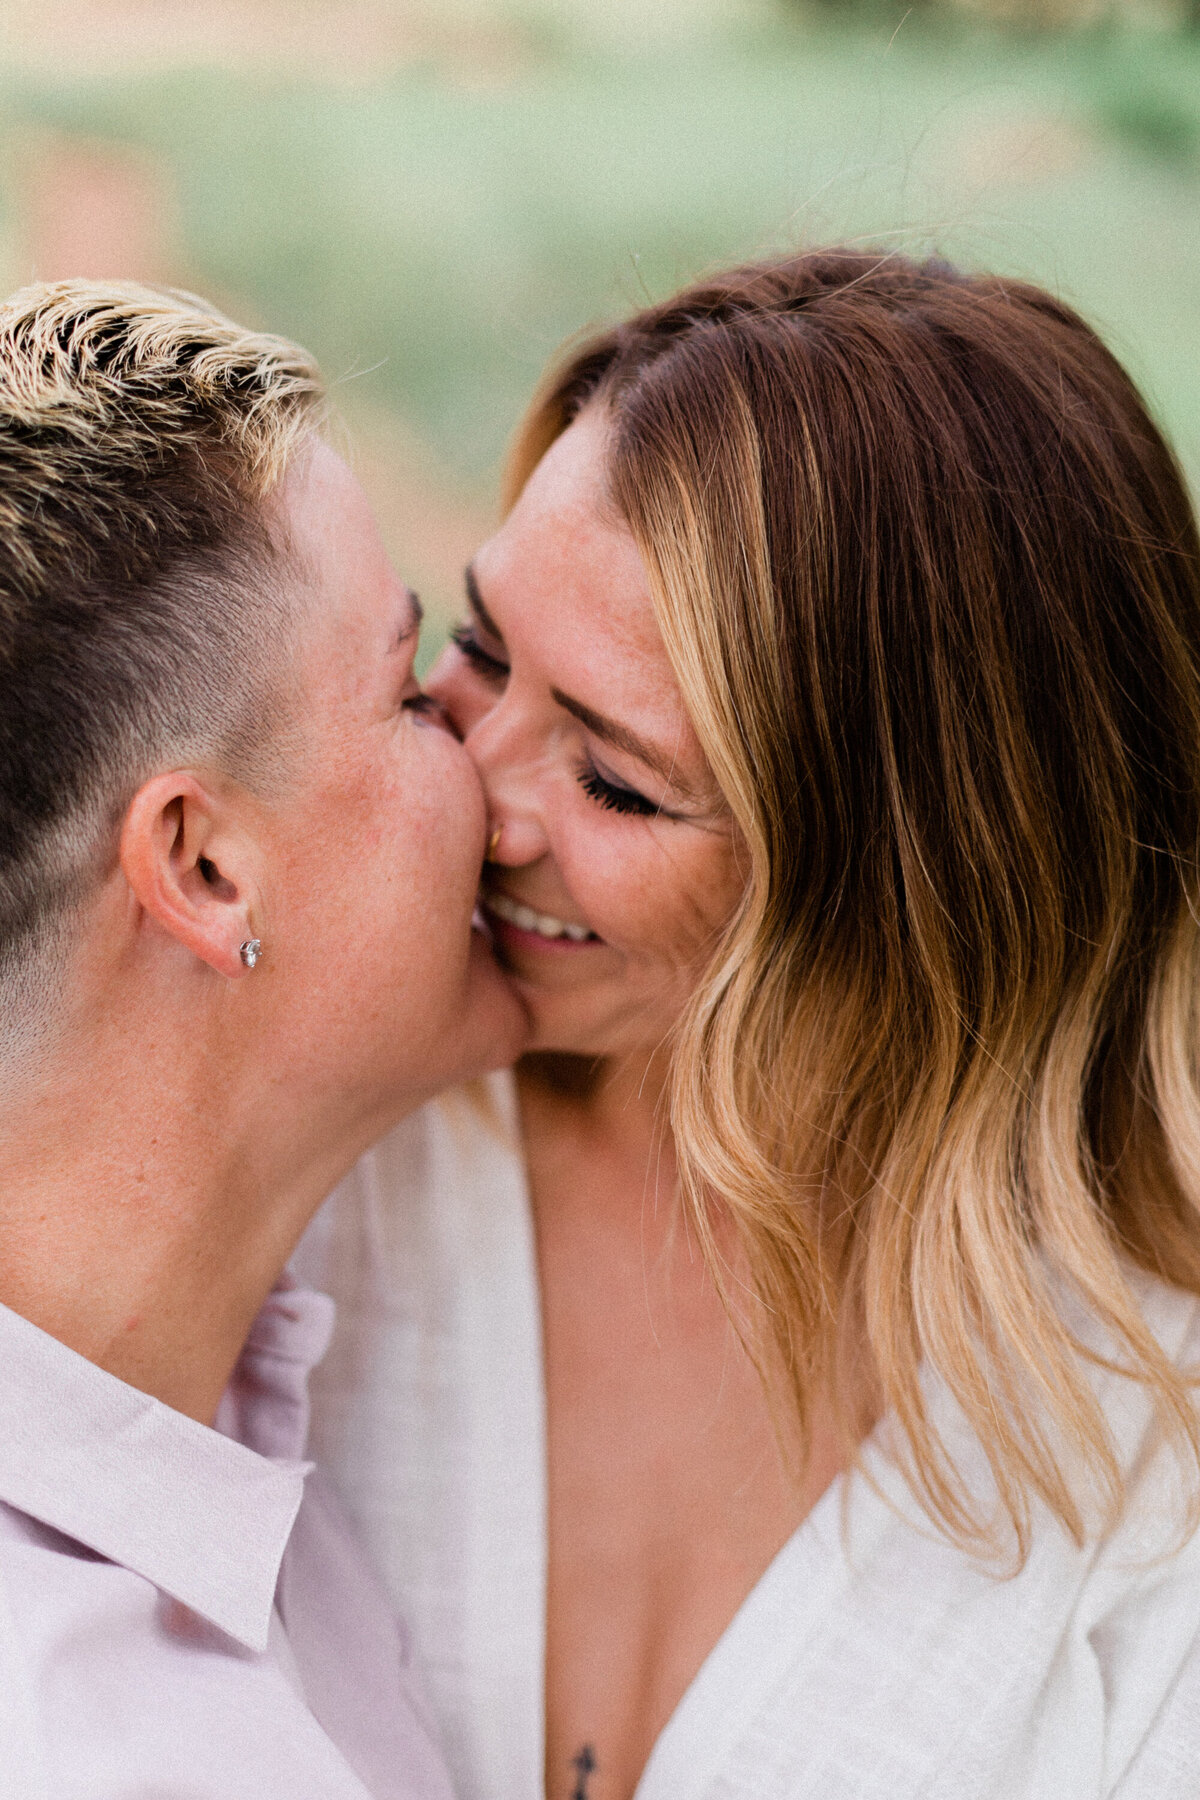 Sunrise_Engagement_Session_Boulder_Coulter_Lgbtq_by_Colorado_Wedding_Photographer_Diana_Coulter-17